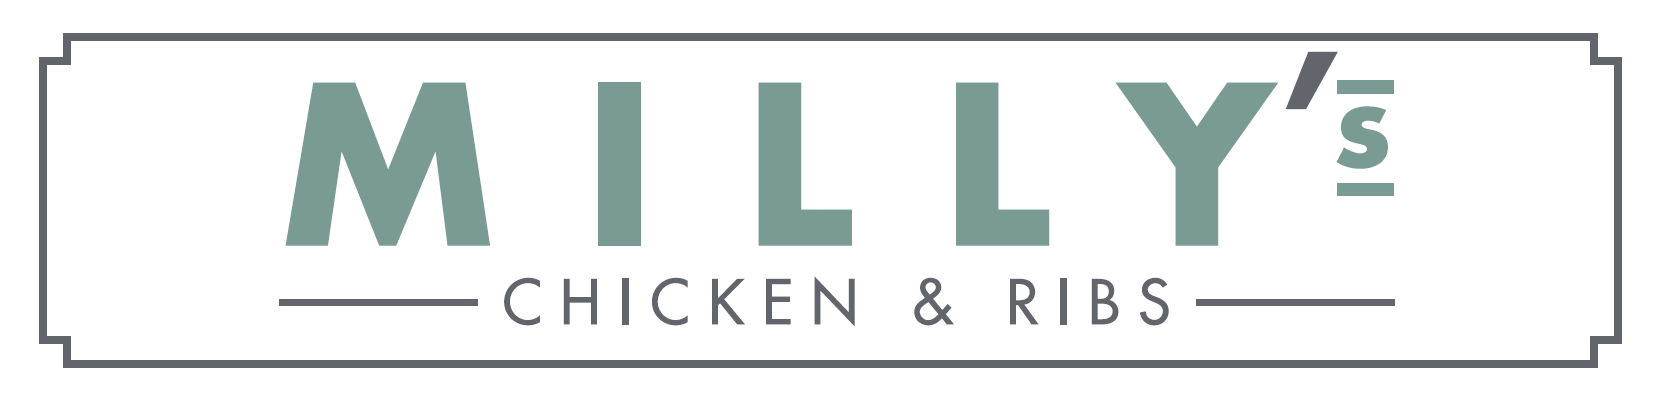 Milly’s Chicken & Ribs